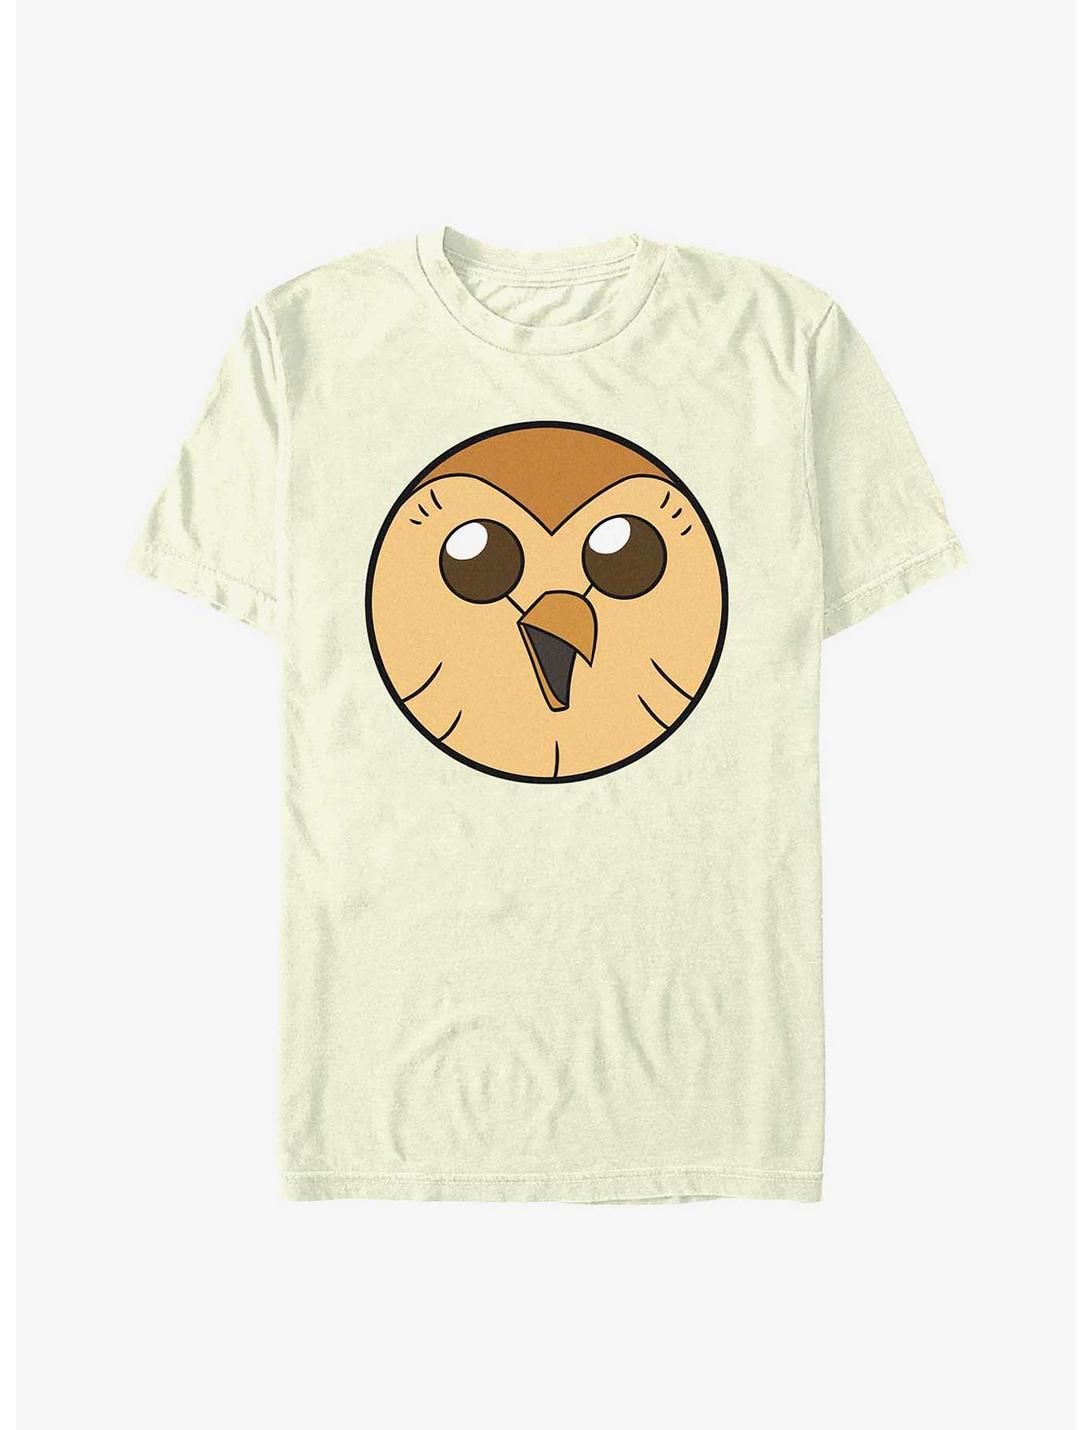 Disney's The Owl House Hooty Face Solid T-Shirt, NATURAL, hi-res